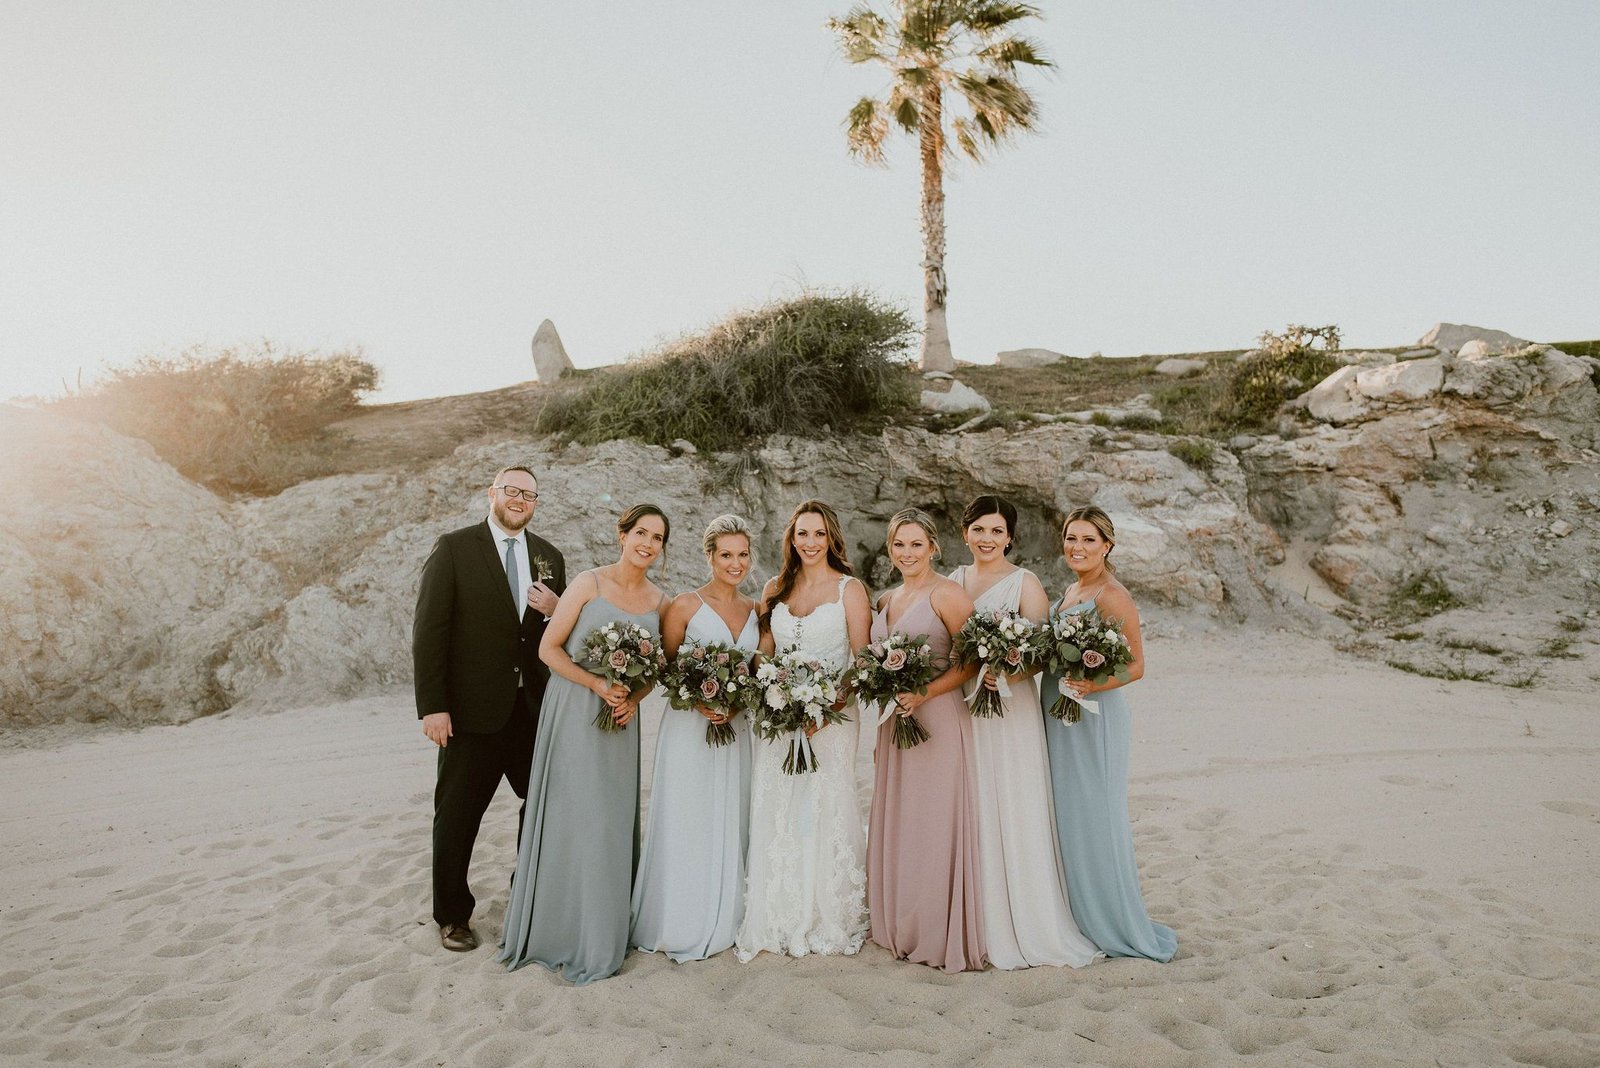 Bride with Bridesmaids at the Beach taking their Bridal Portraits with the Bridal Party. This was at Cabo del Sol in Cabo San Lucas, Mexico. Wedding Planning was done by Cabo Wedding Services.